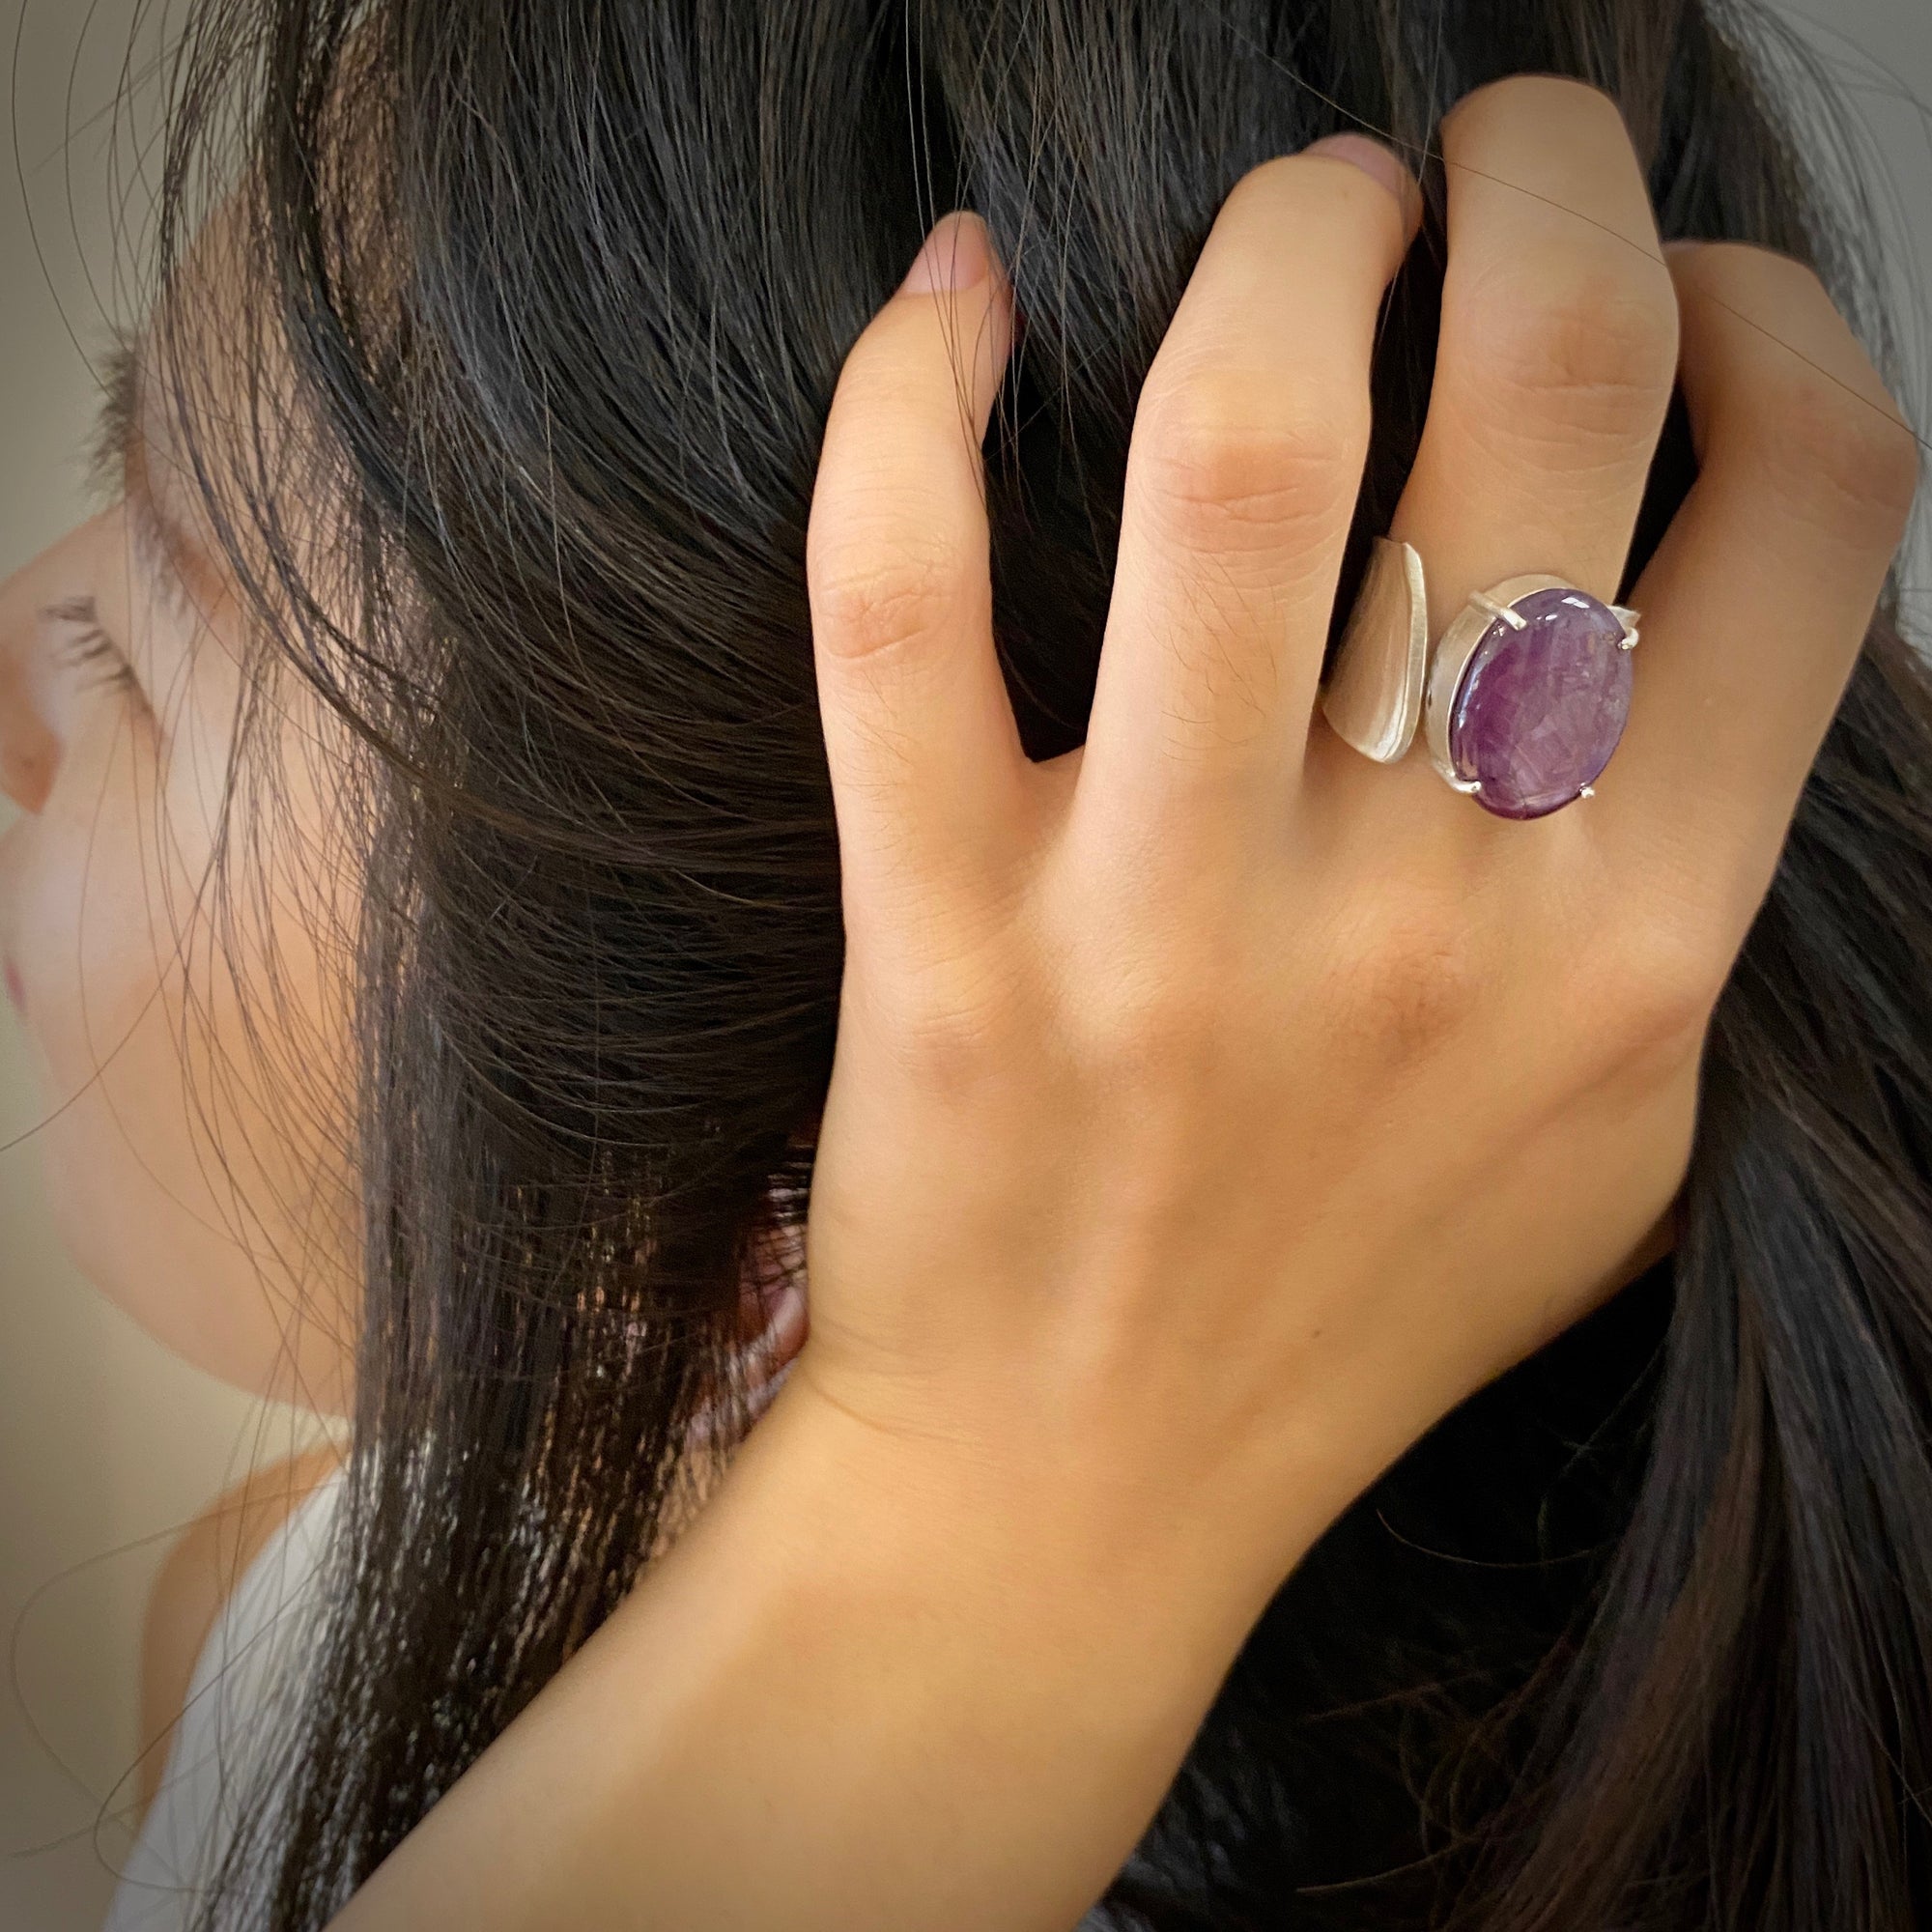 Wide Wafer texture ring in sterling silver with a large oval Star Ruby cabochon by Ayesha Mayadas shown on model